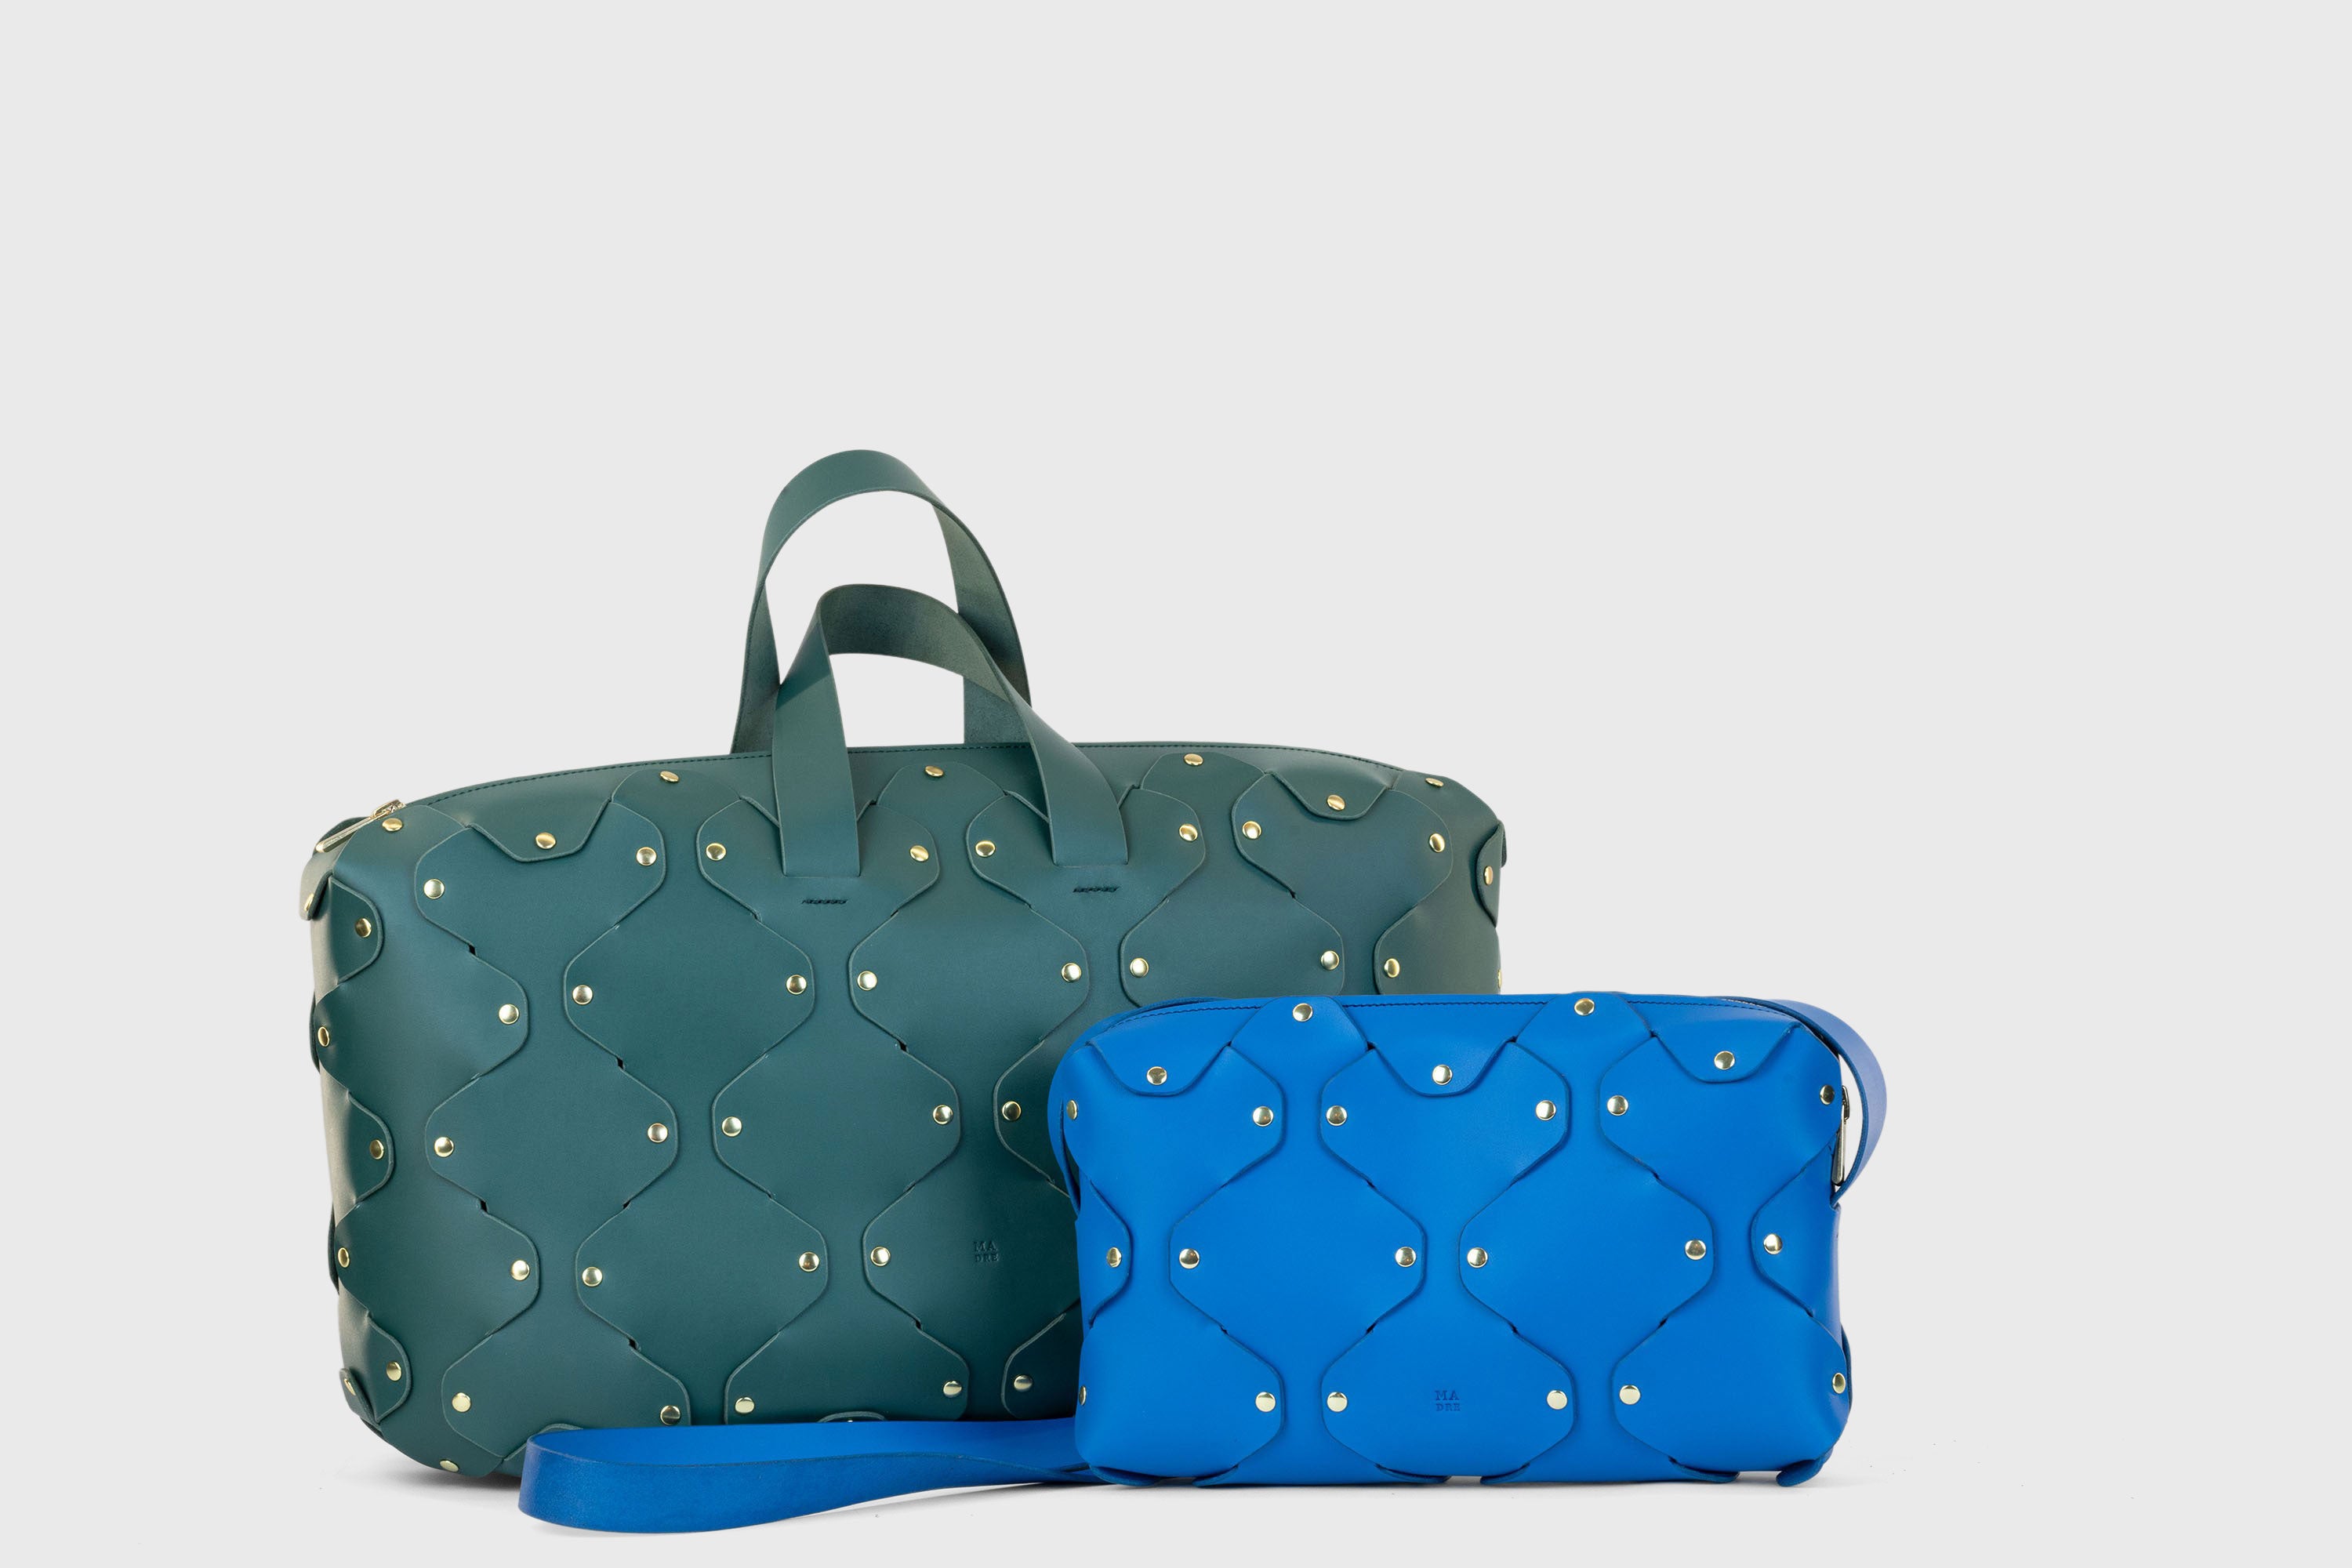 Press Release: NYFW Premiere - Atelier Madre presents the Sealife bag collection